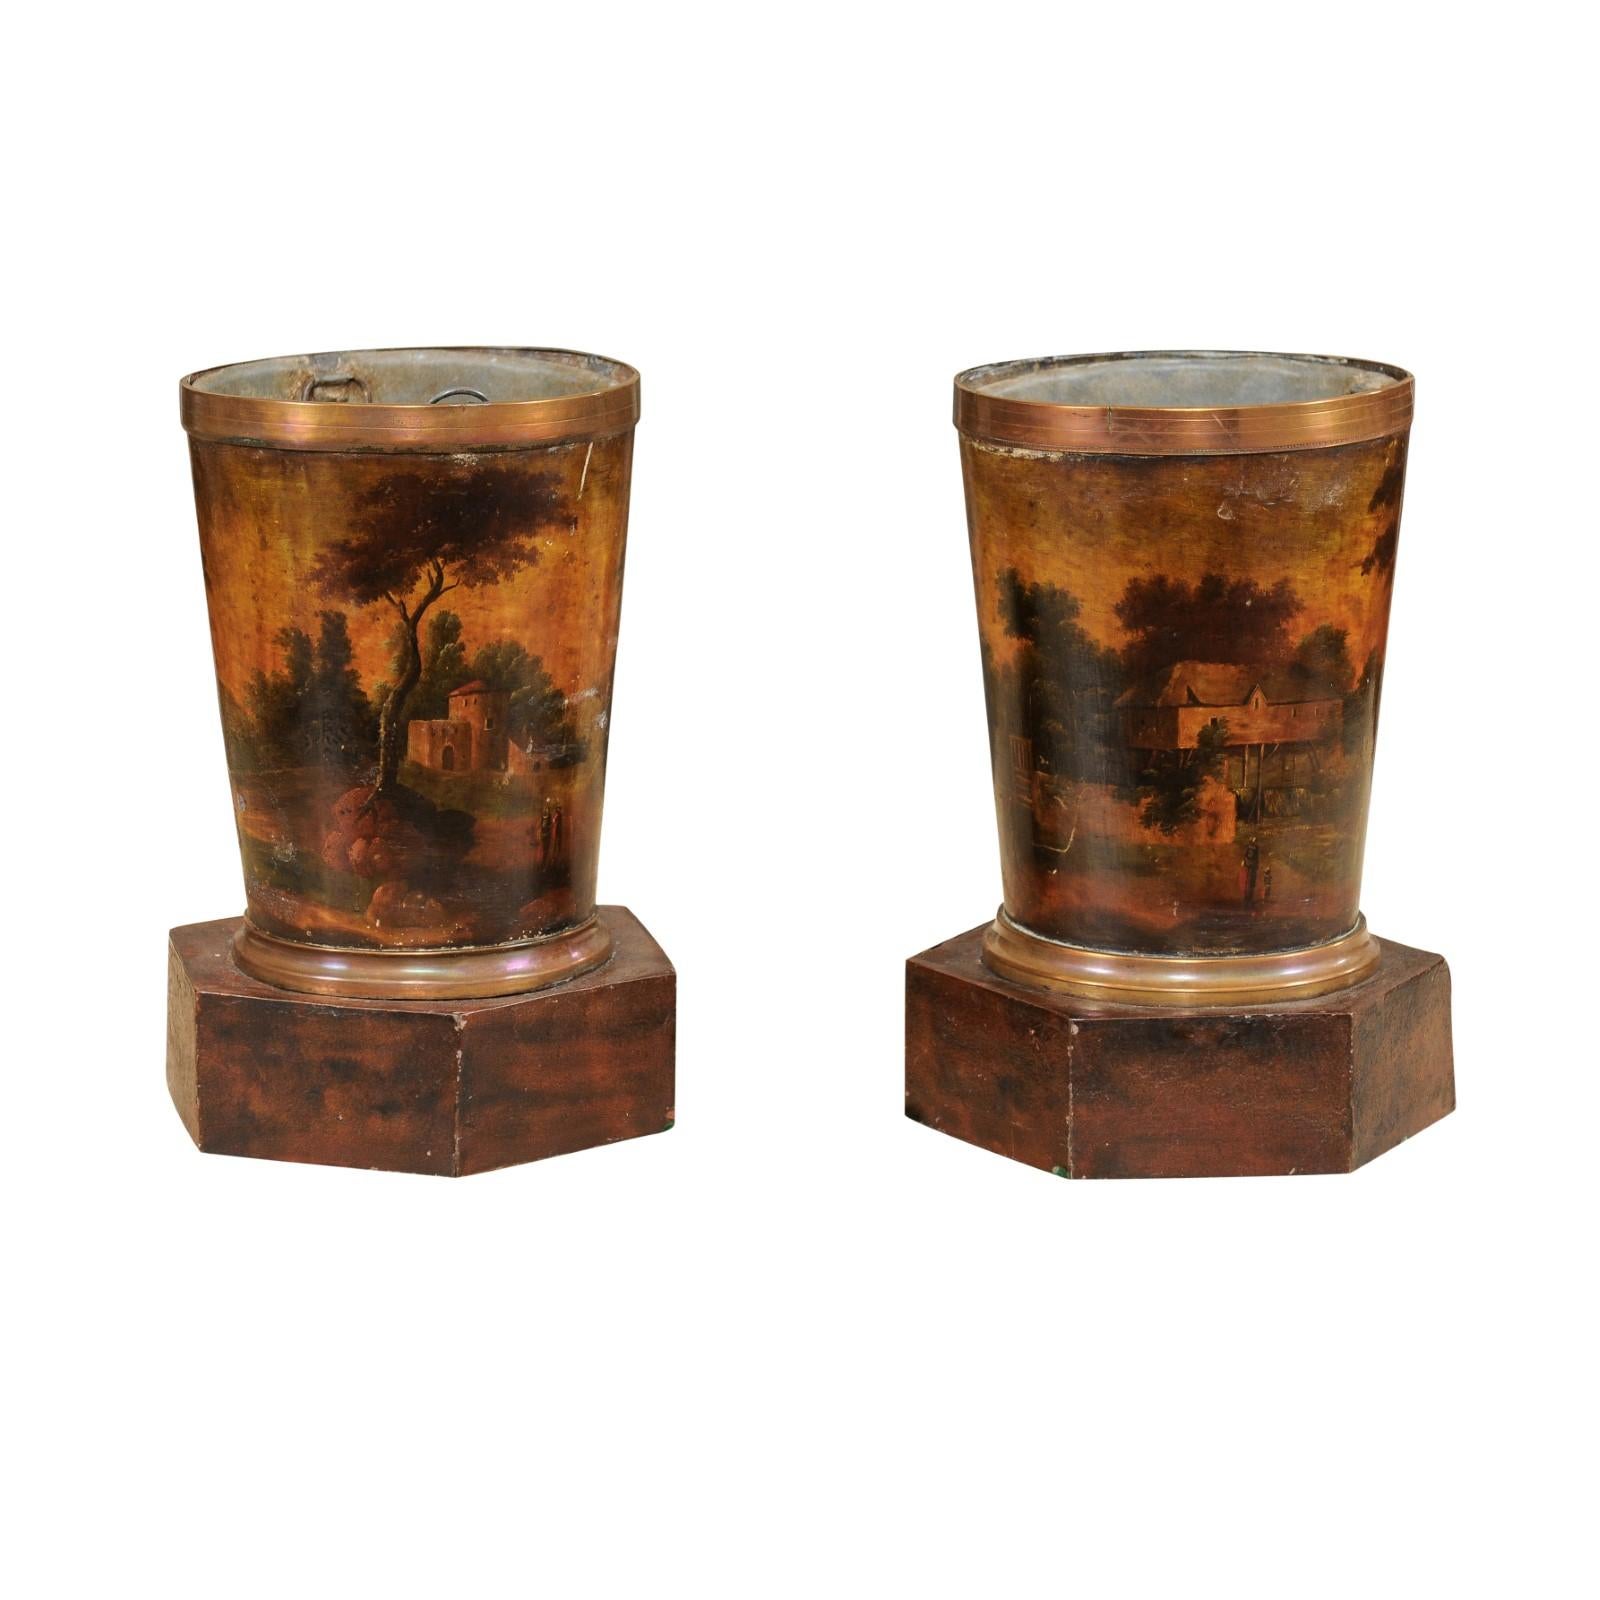  19th Century Painted Tole Cachepots with Landscape Scenes, 19th Century France